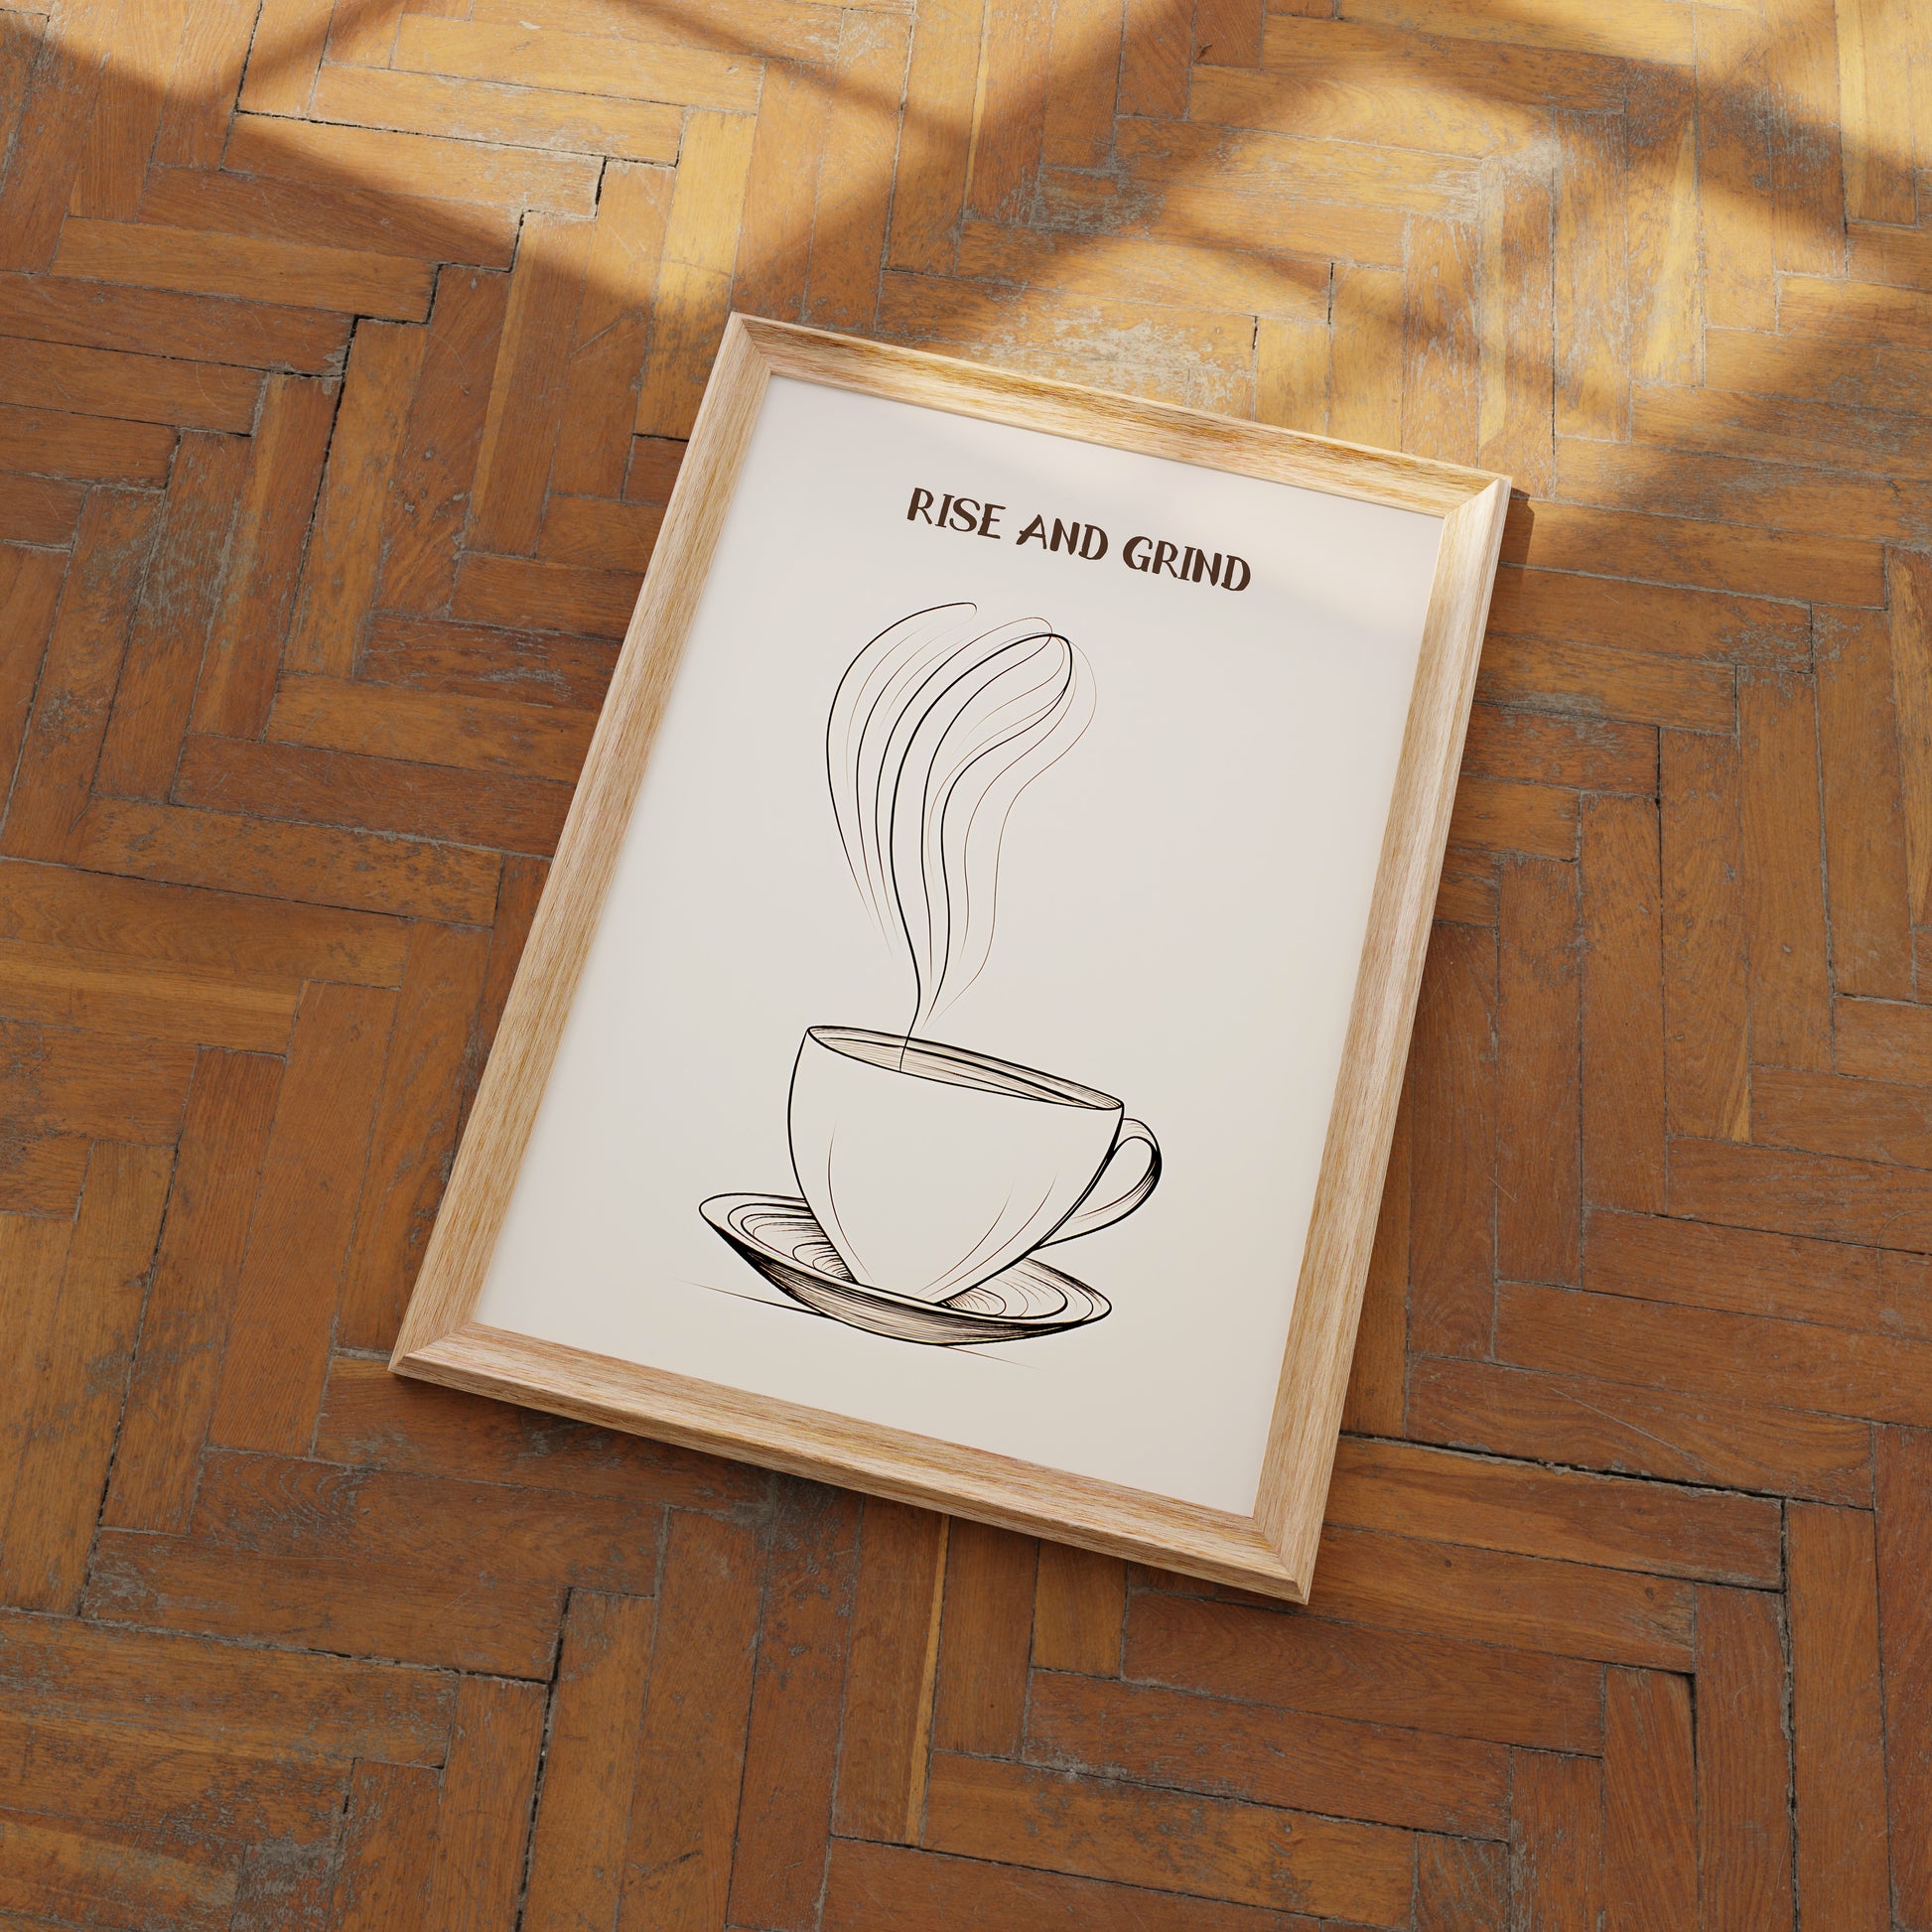 A framed poster of a coffee cup with the phrase "RISE AND GRIND" on a wooden floor.